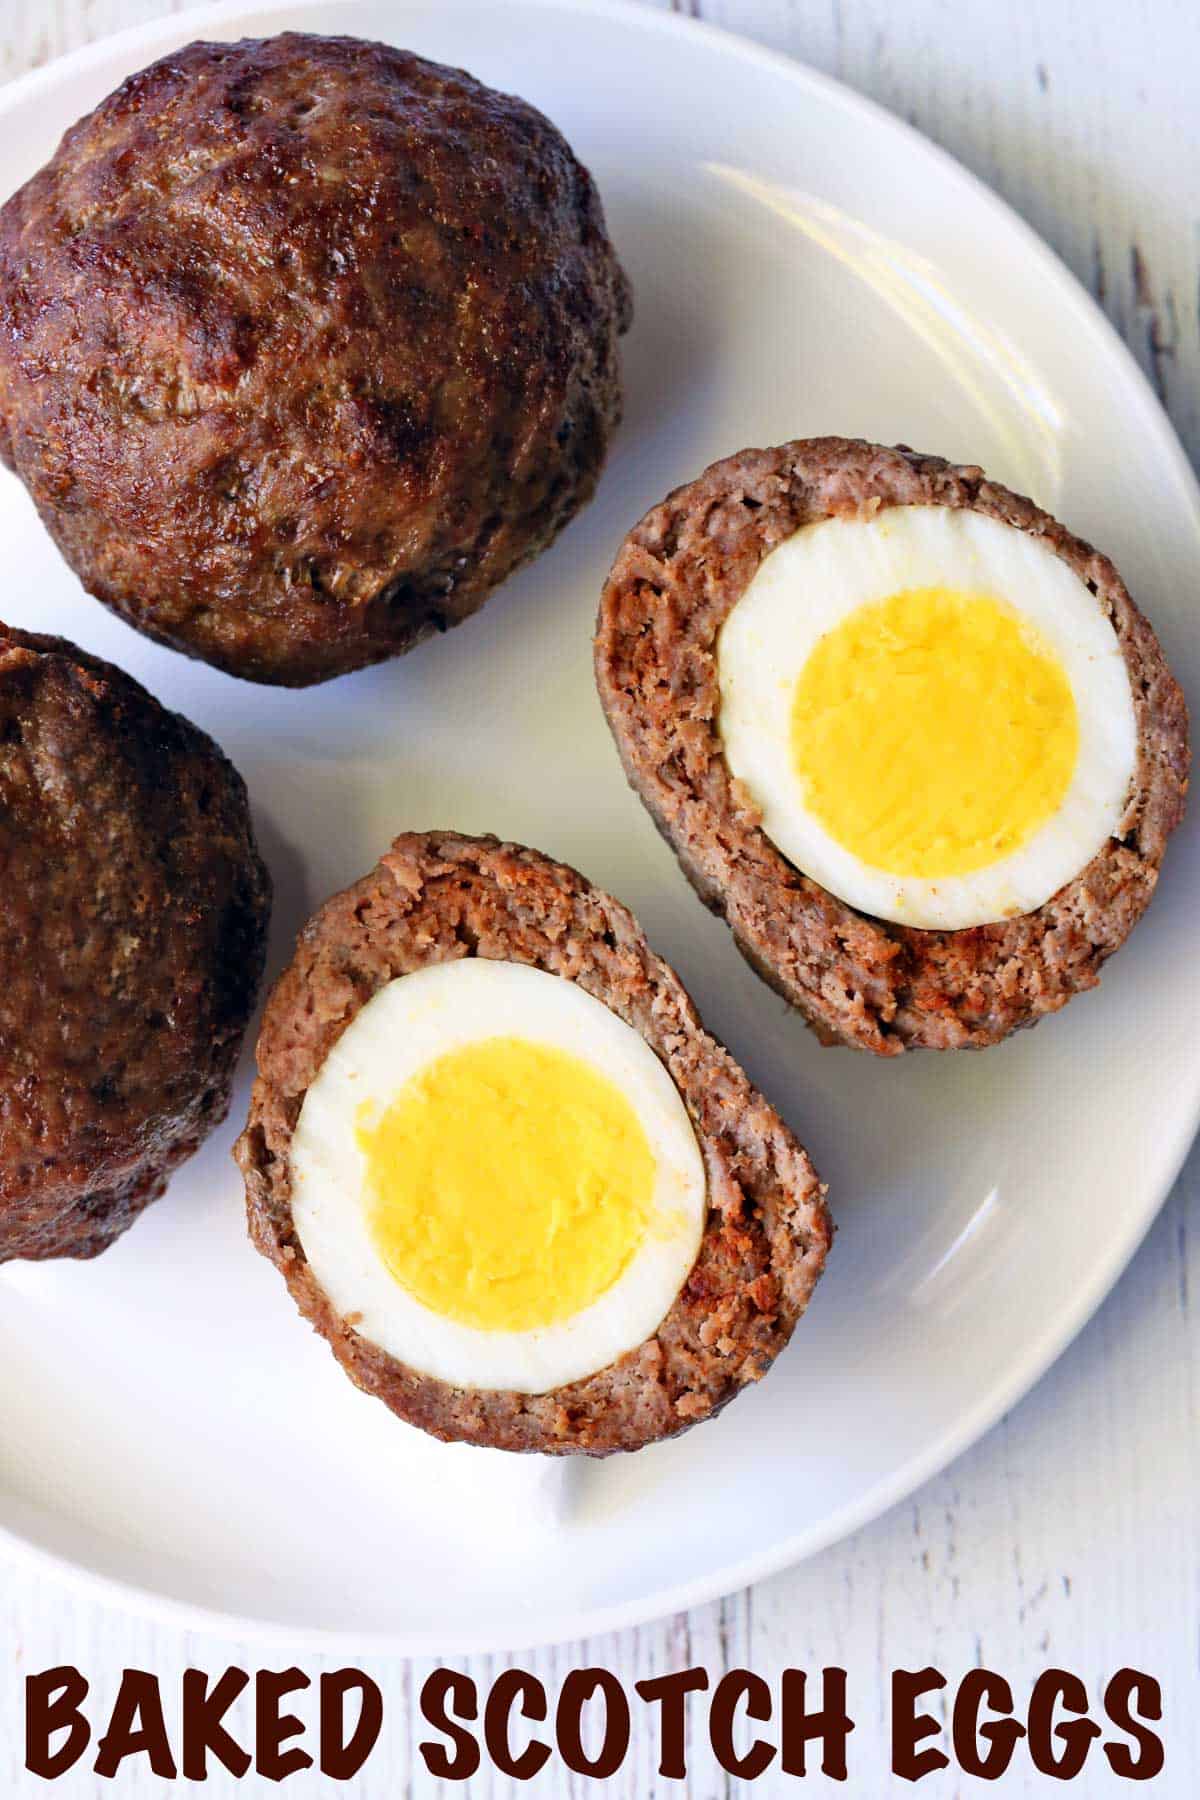 Oven-baked Scotch eggs served on a white plate.